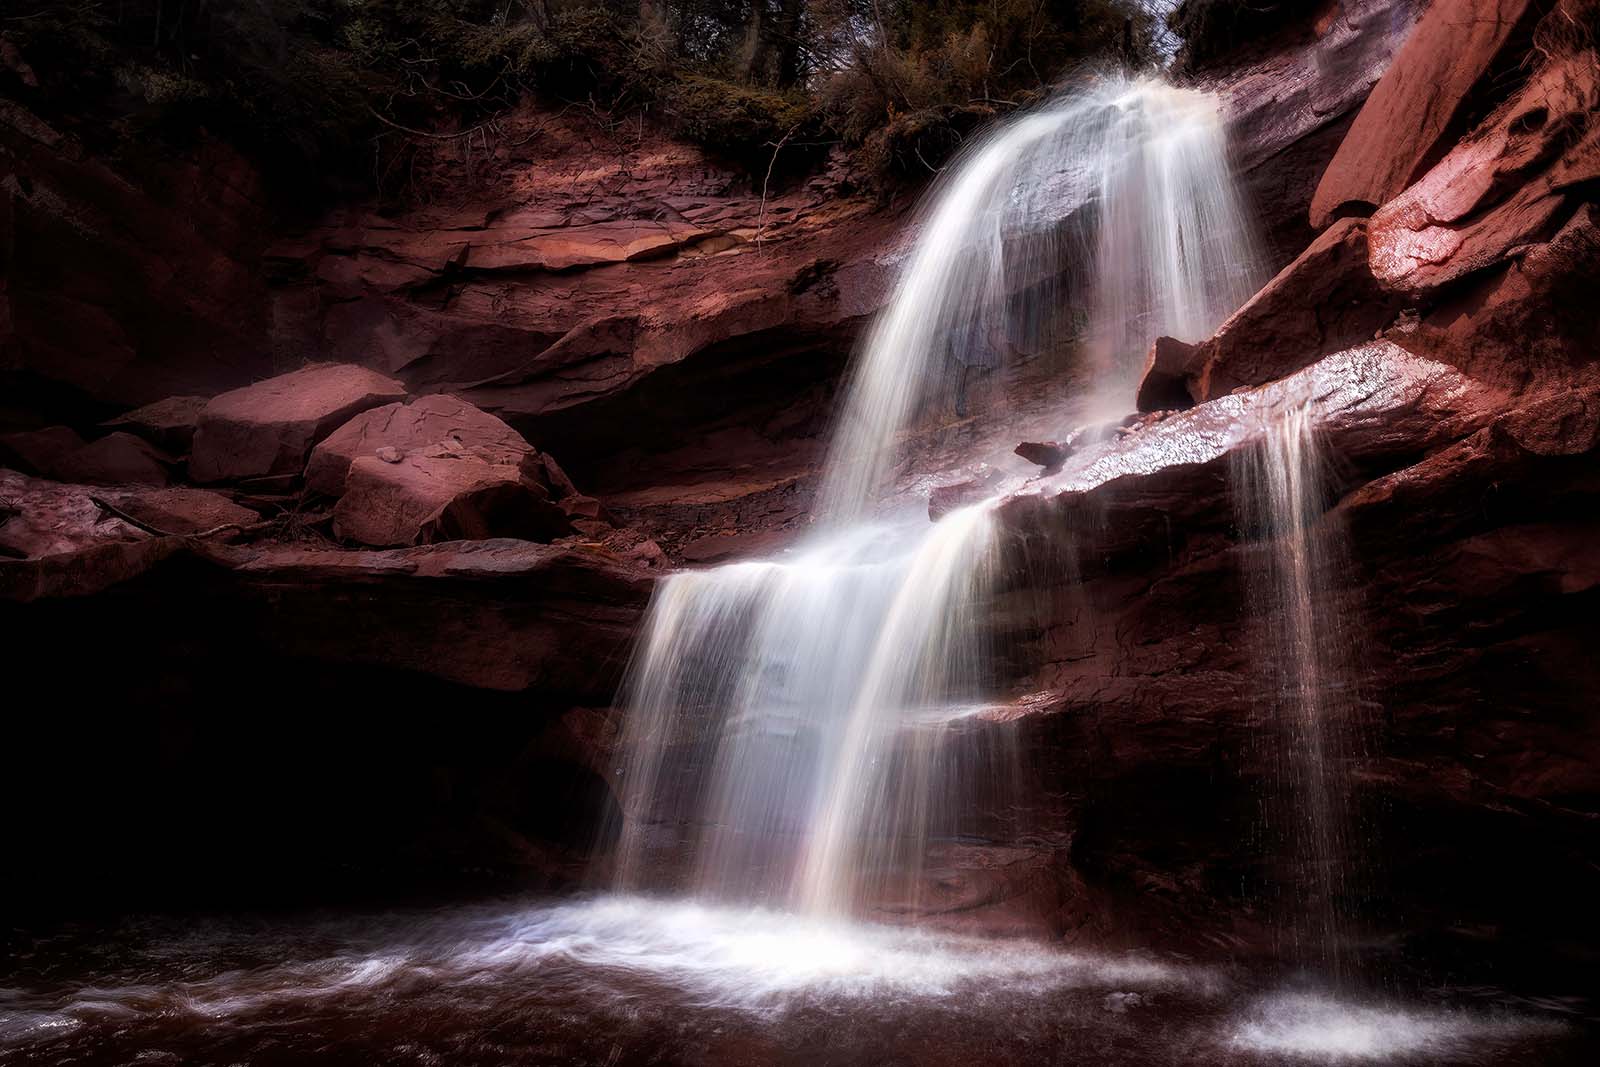  waterfall in the apostle islands national lakeshore on lake superior wisconsin